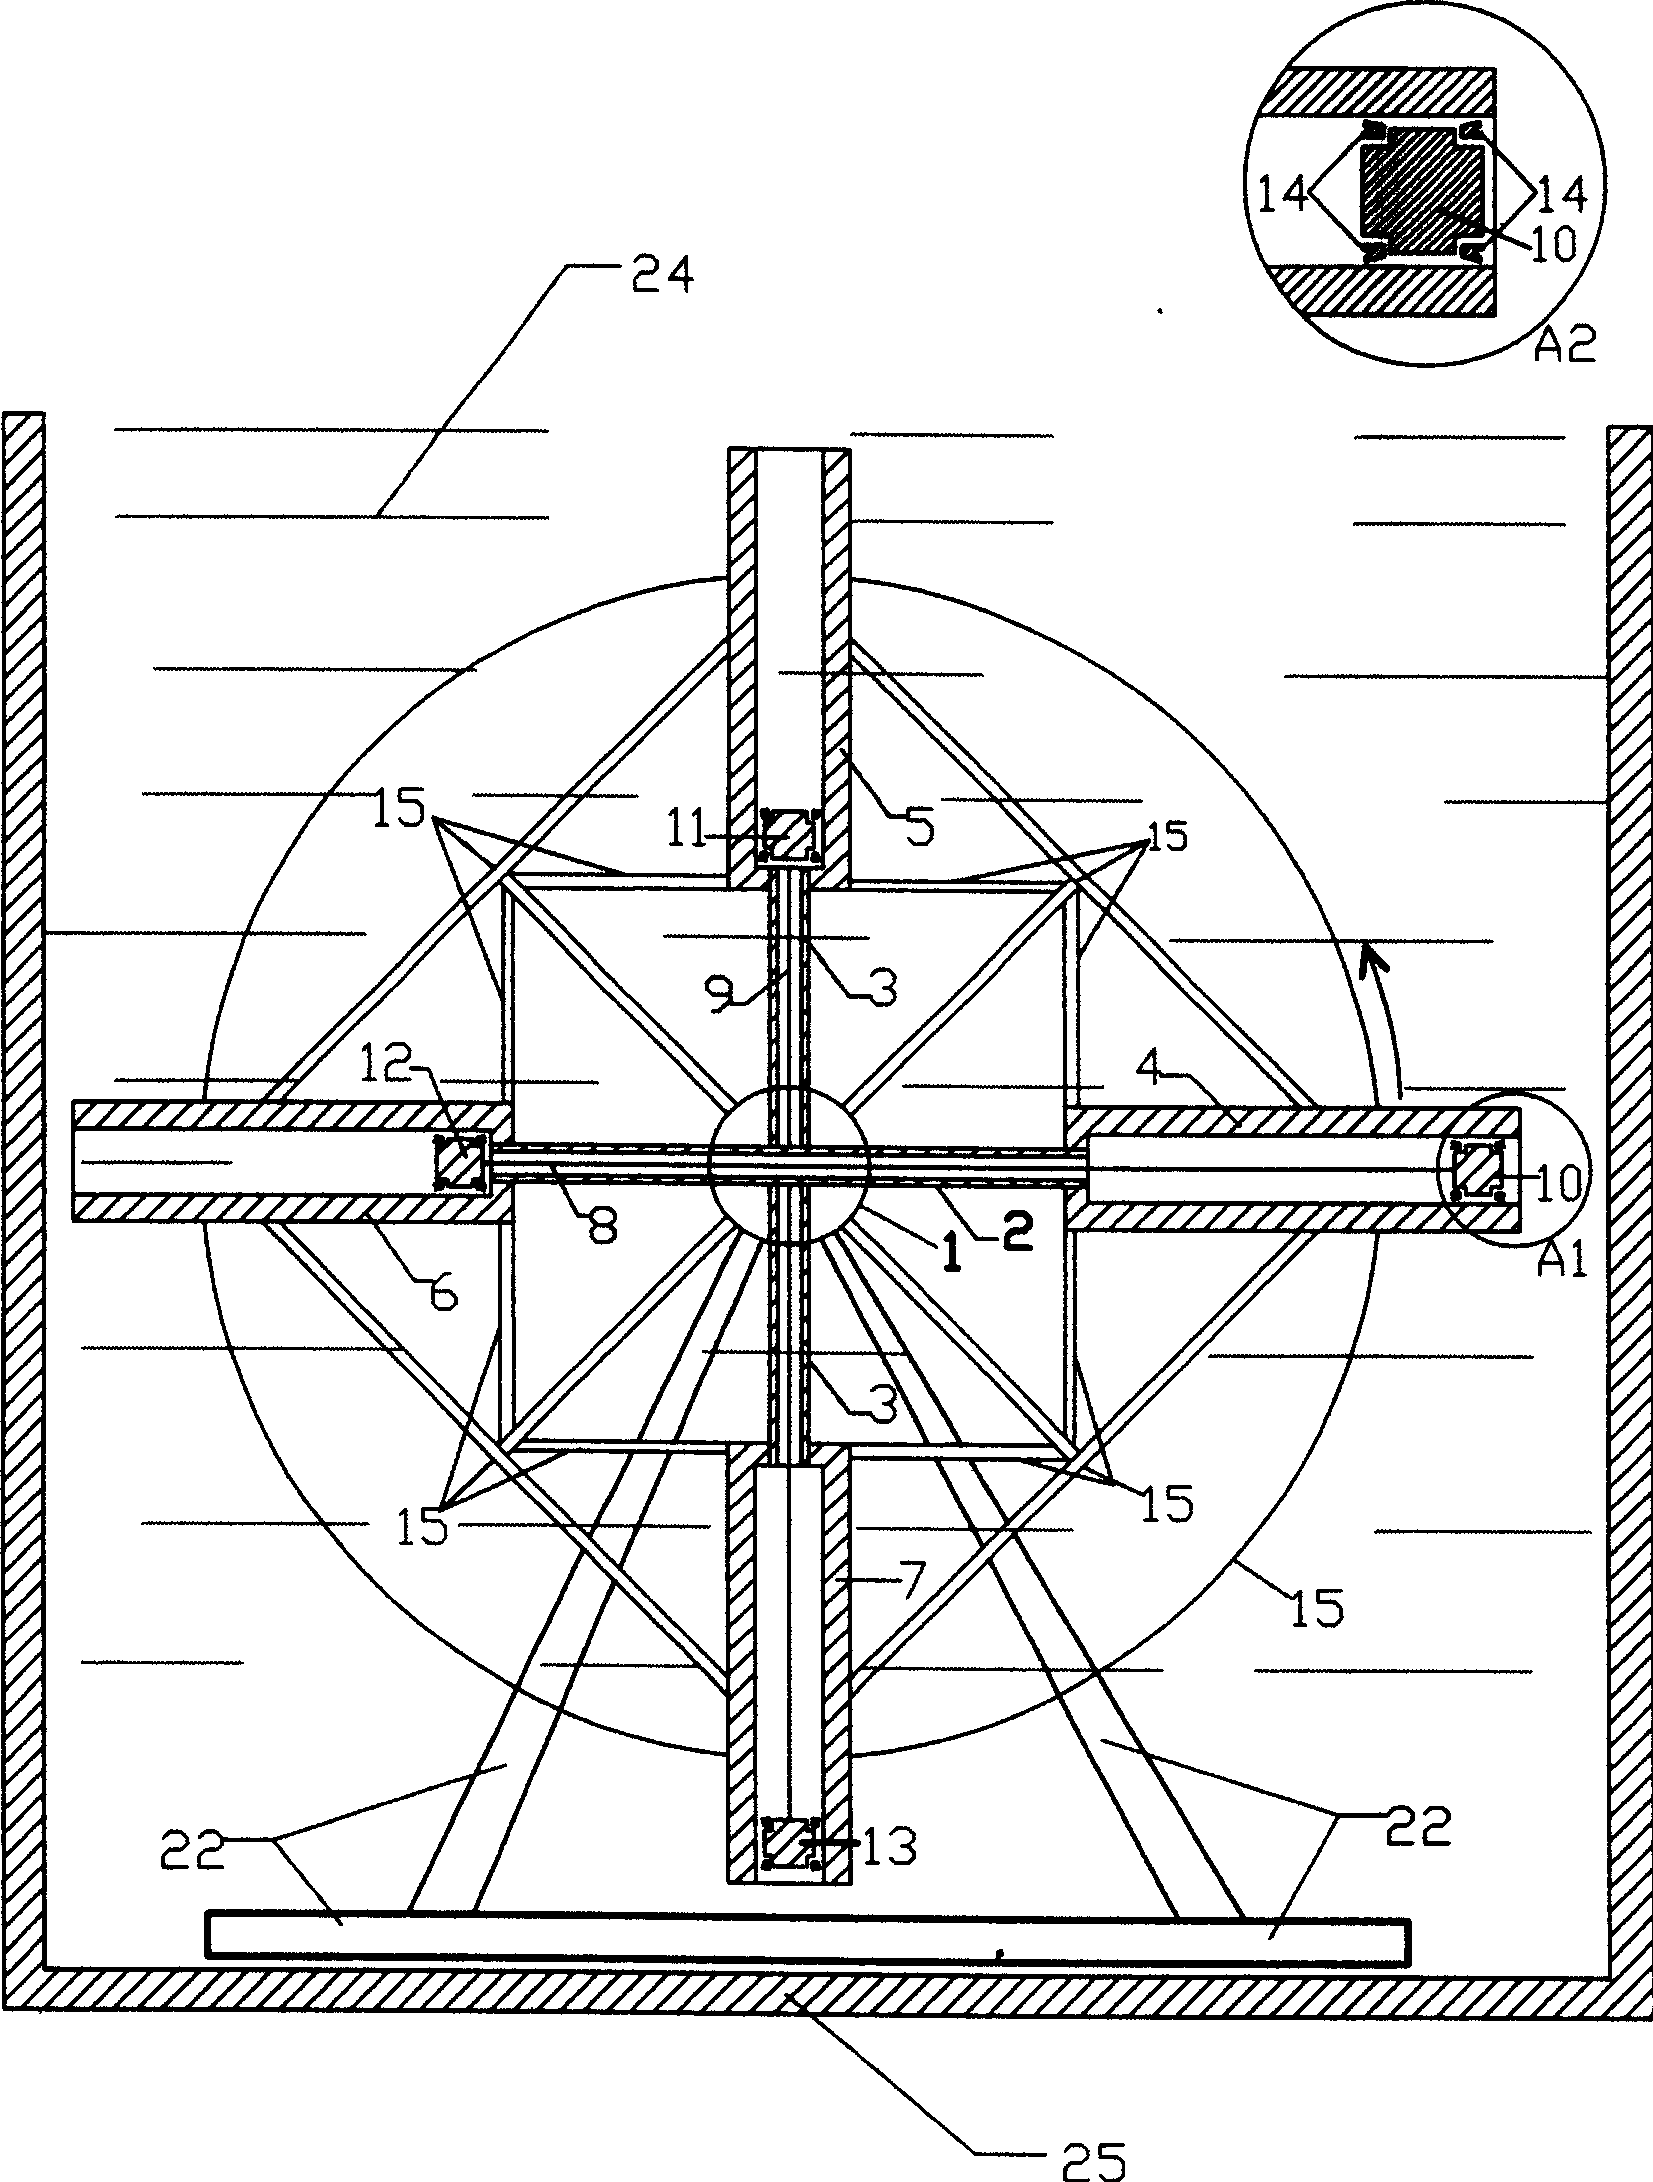 Output machine for converting buoyancy into rotating force